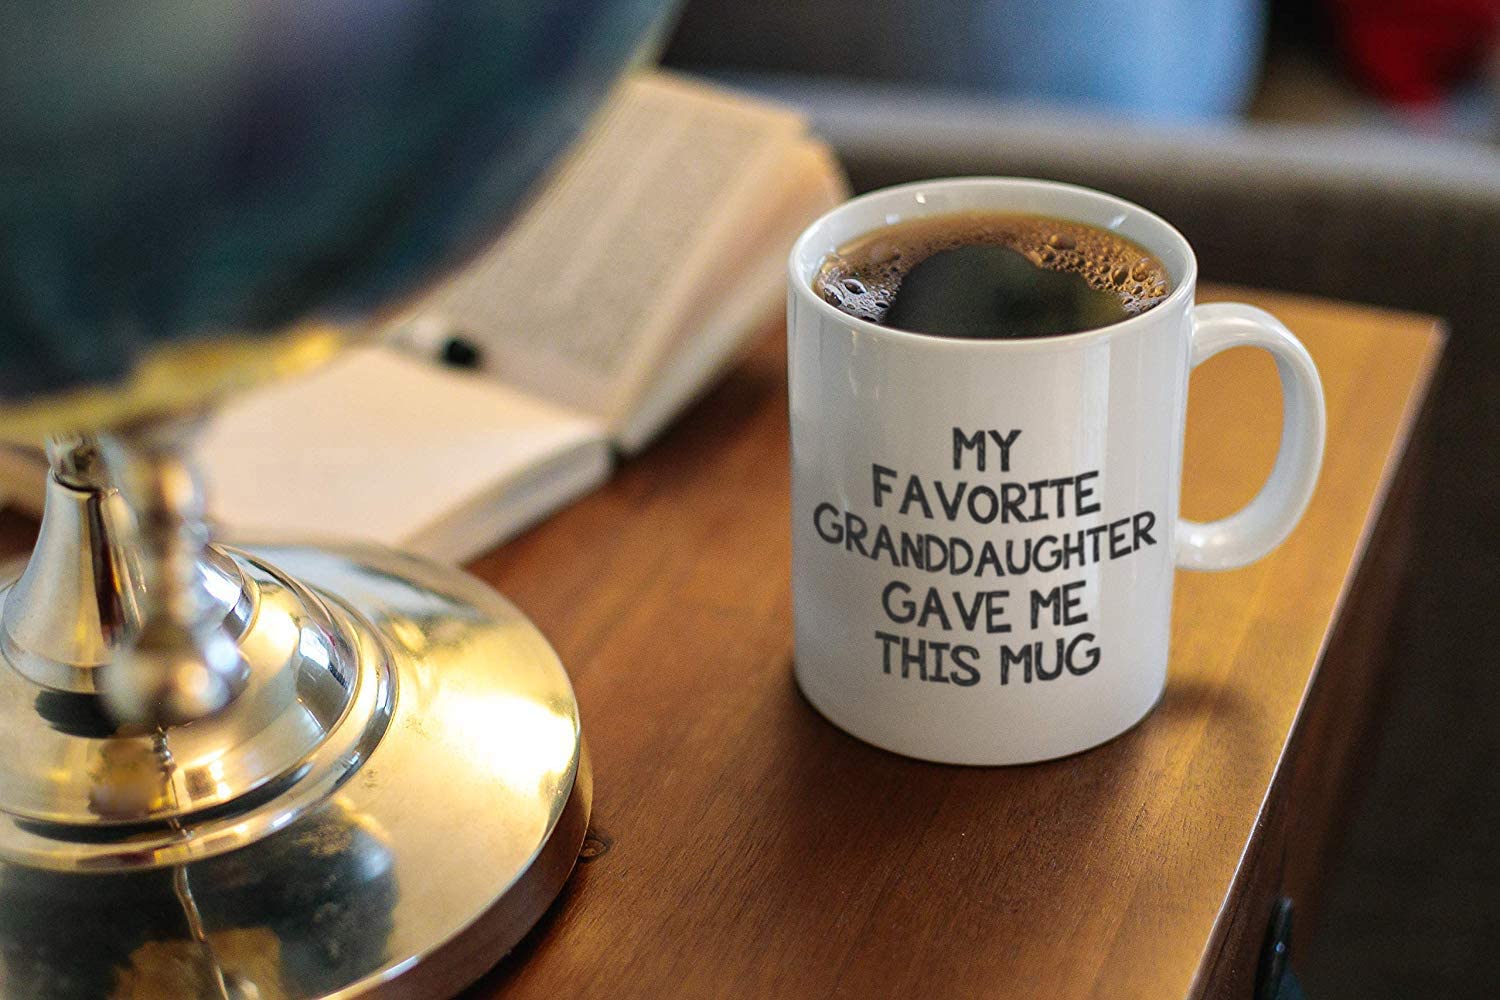 A white mug full of black coffee on a wooden table. On the mug there are words printed on it which say, 'my favorite granddaughter gave me this mug'